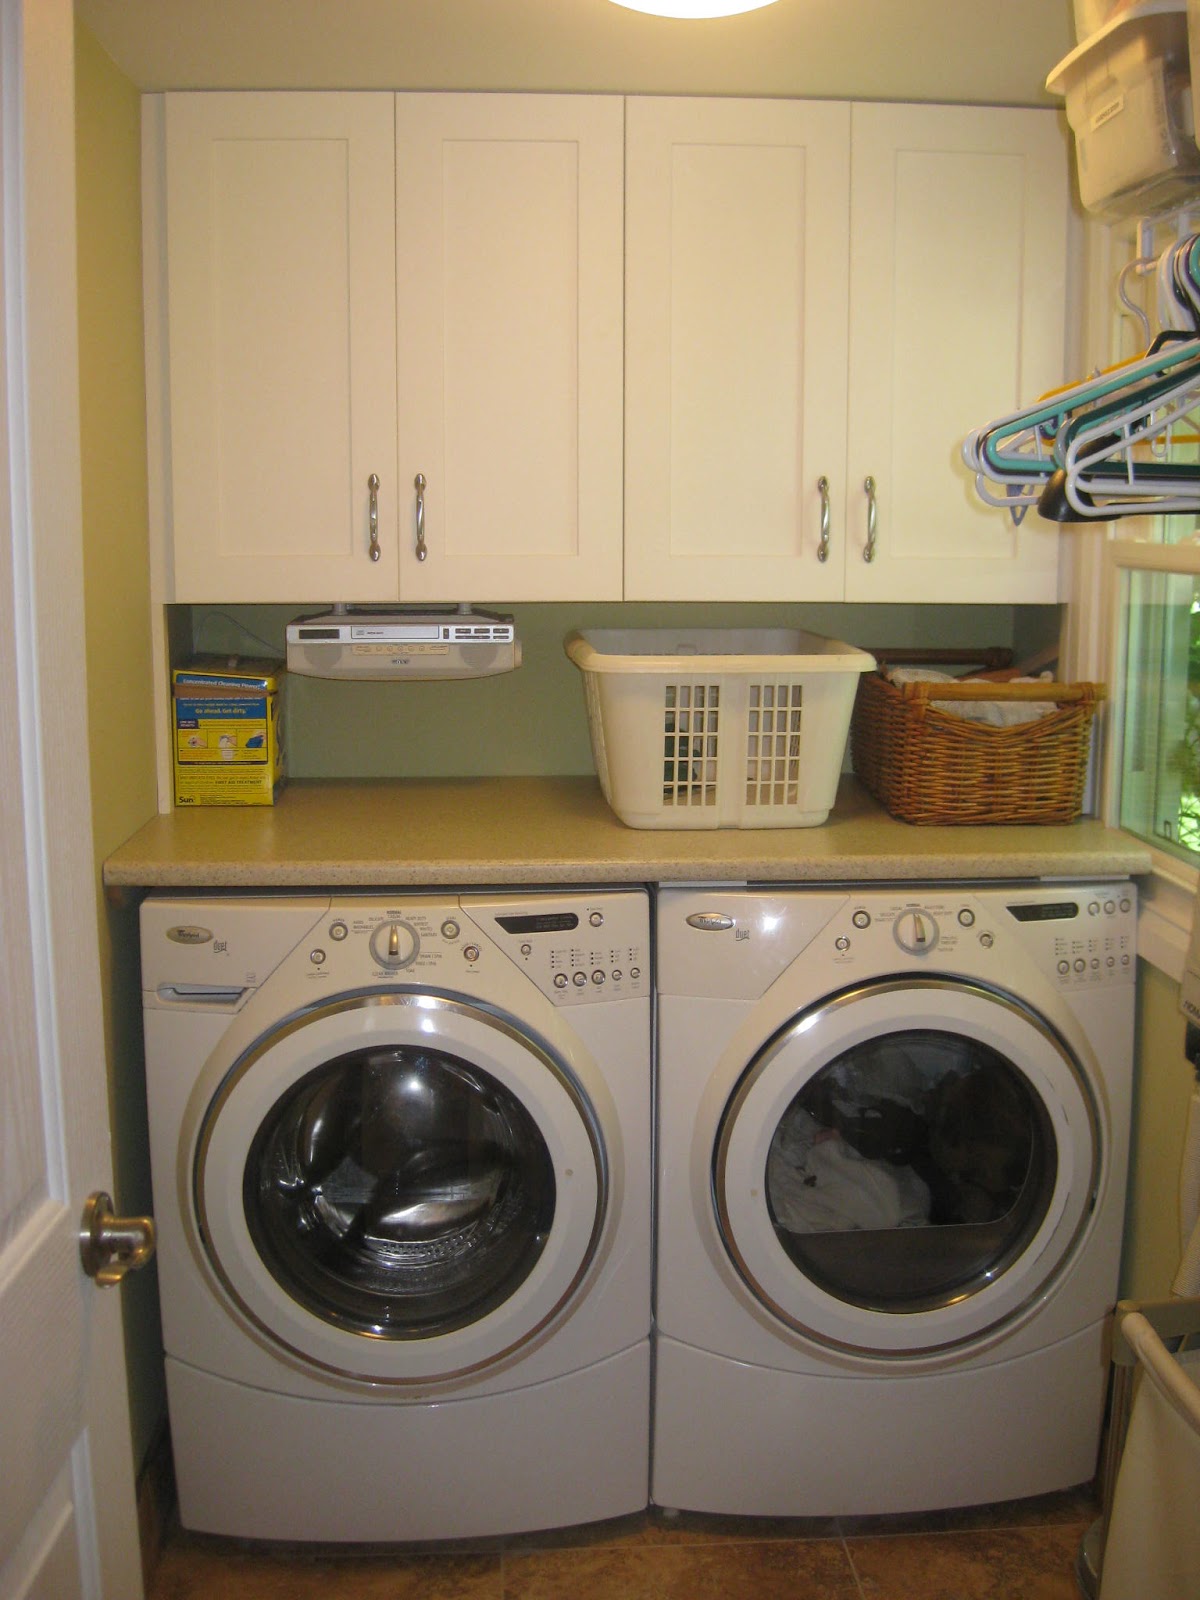 FIVE STAR PHOTO GALLERY: Laundry Room with Folding Station